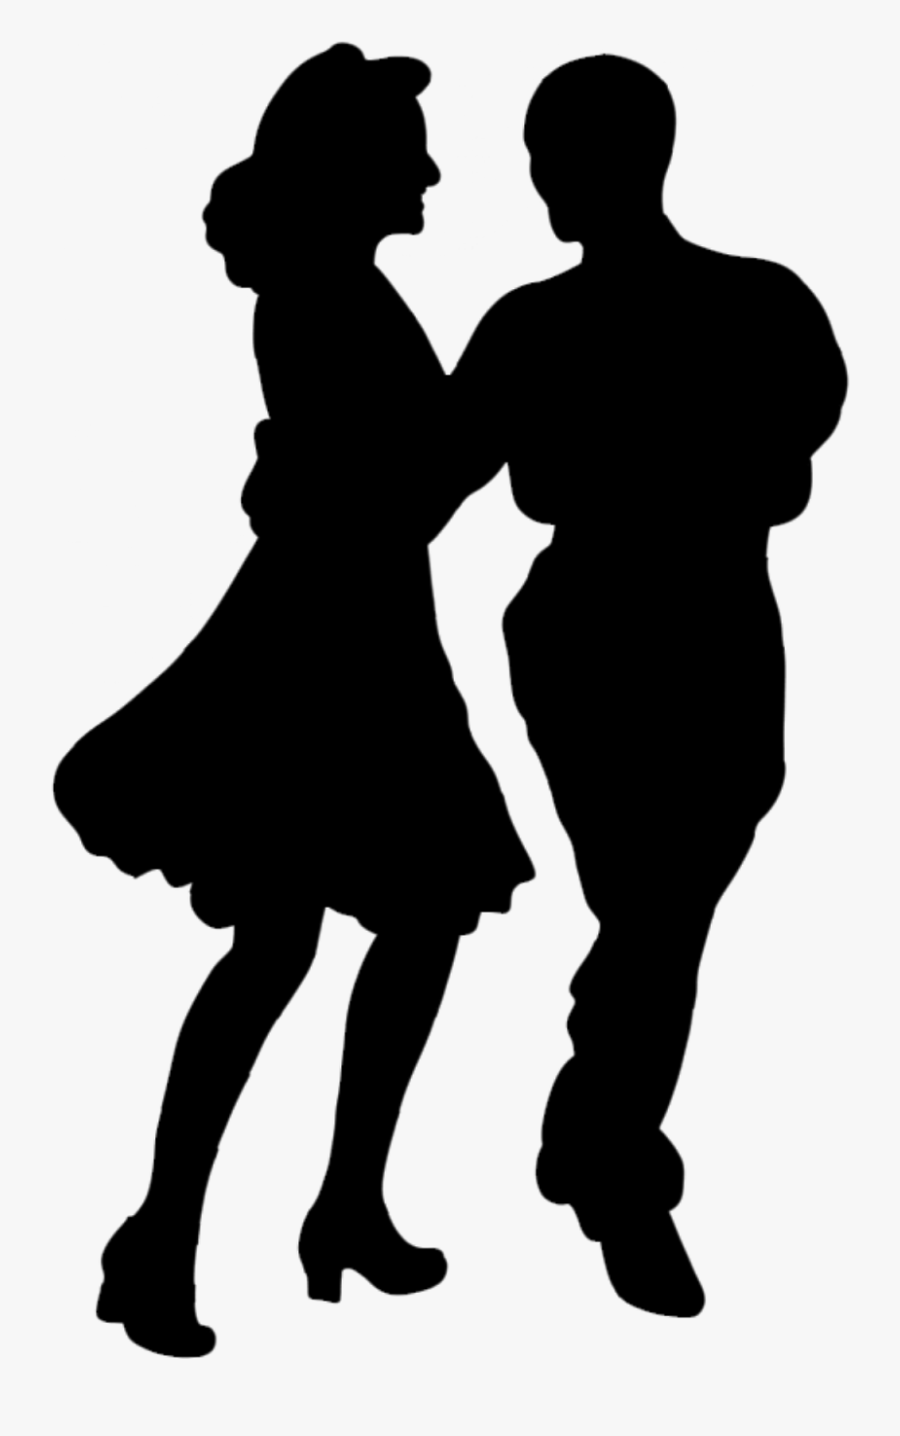 Download Free Illustration Of Dance Silhouette Couple - Couple Dance Silhouette, Transparent Clipart